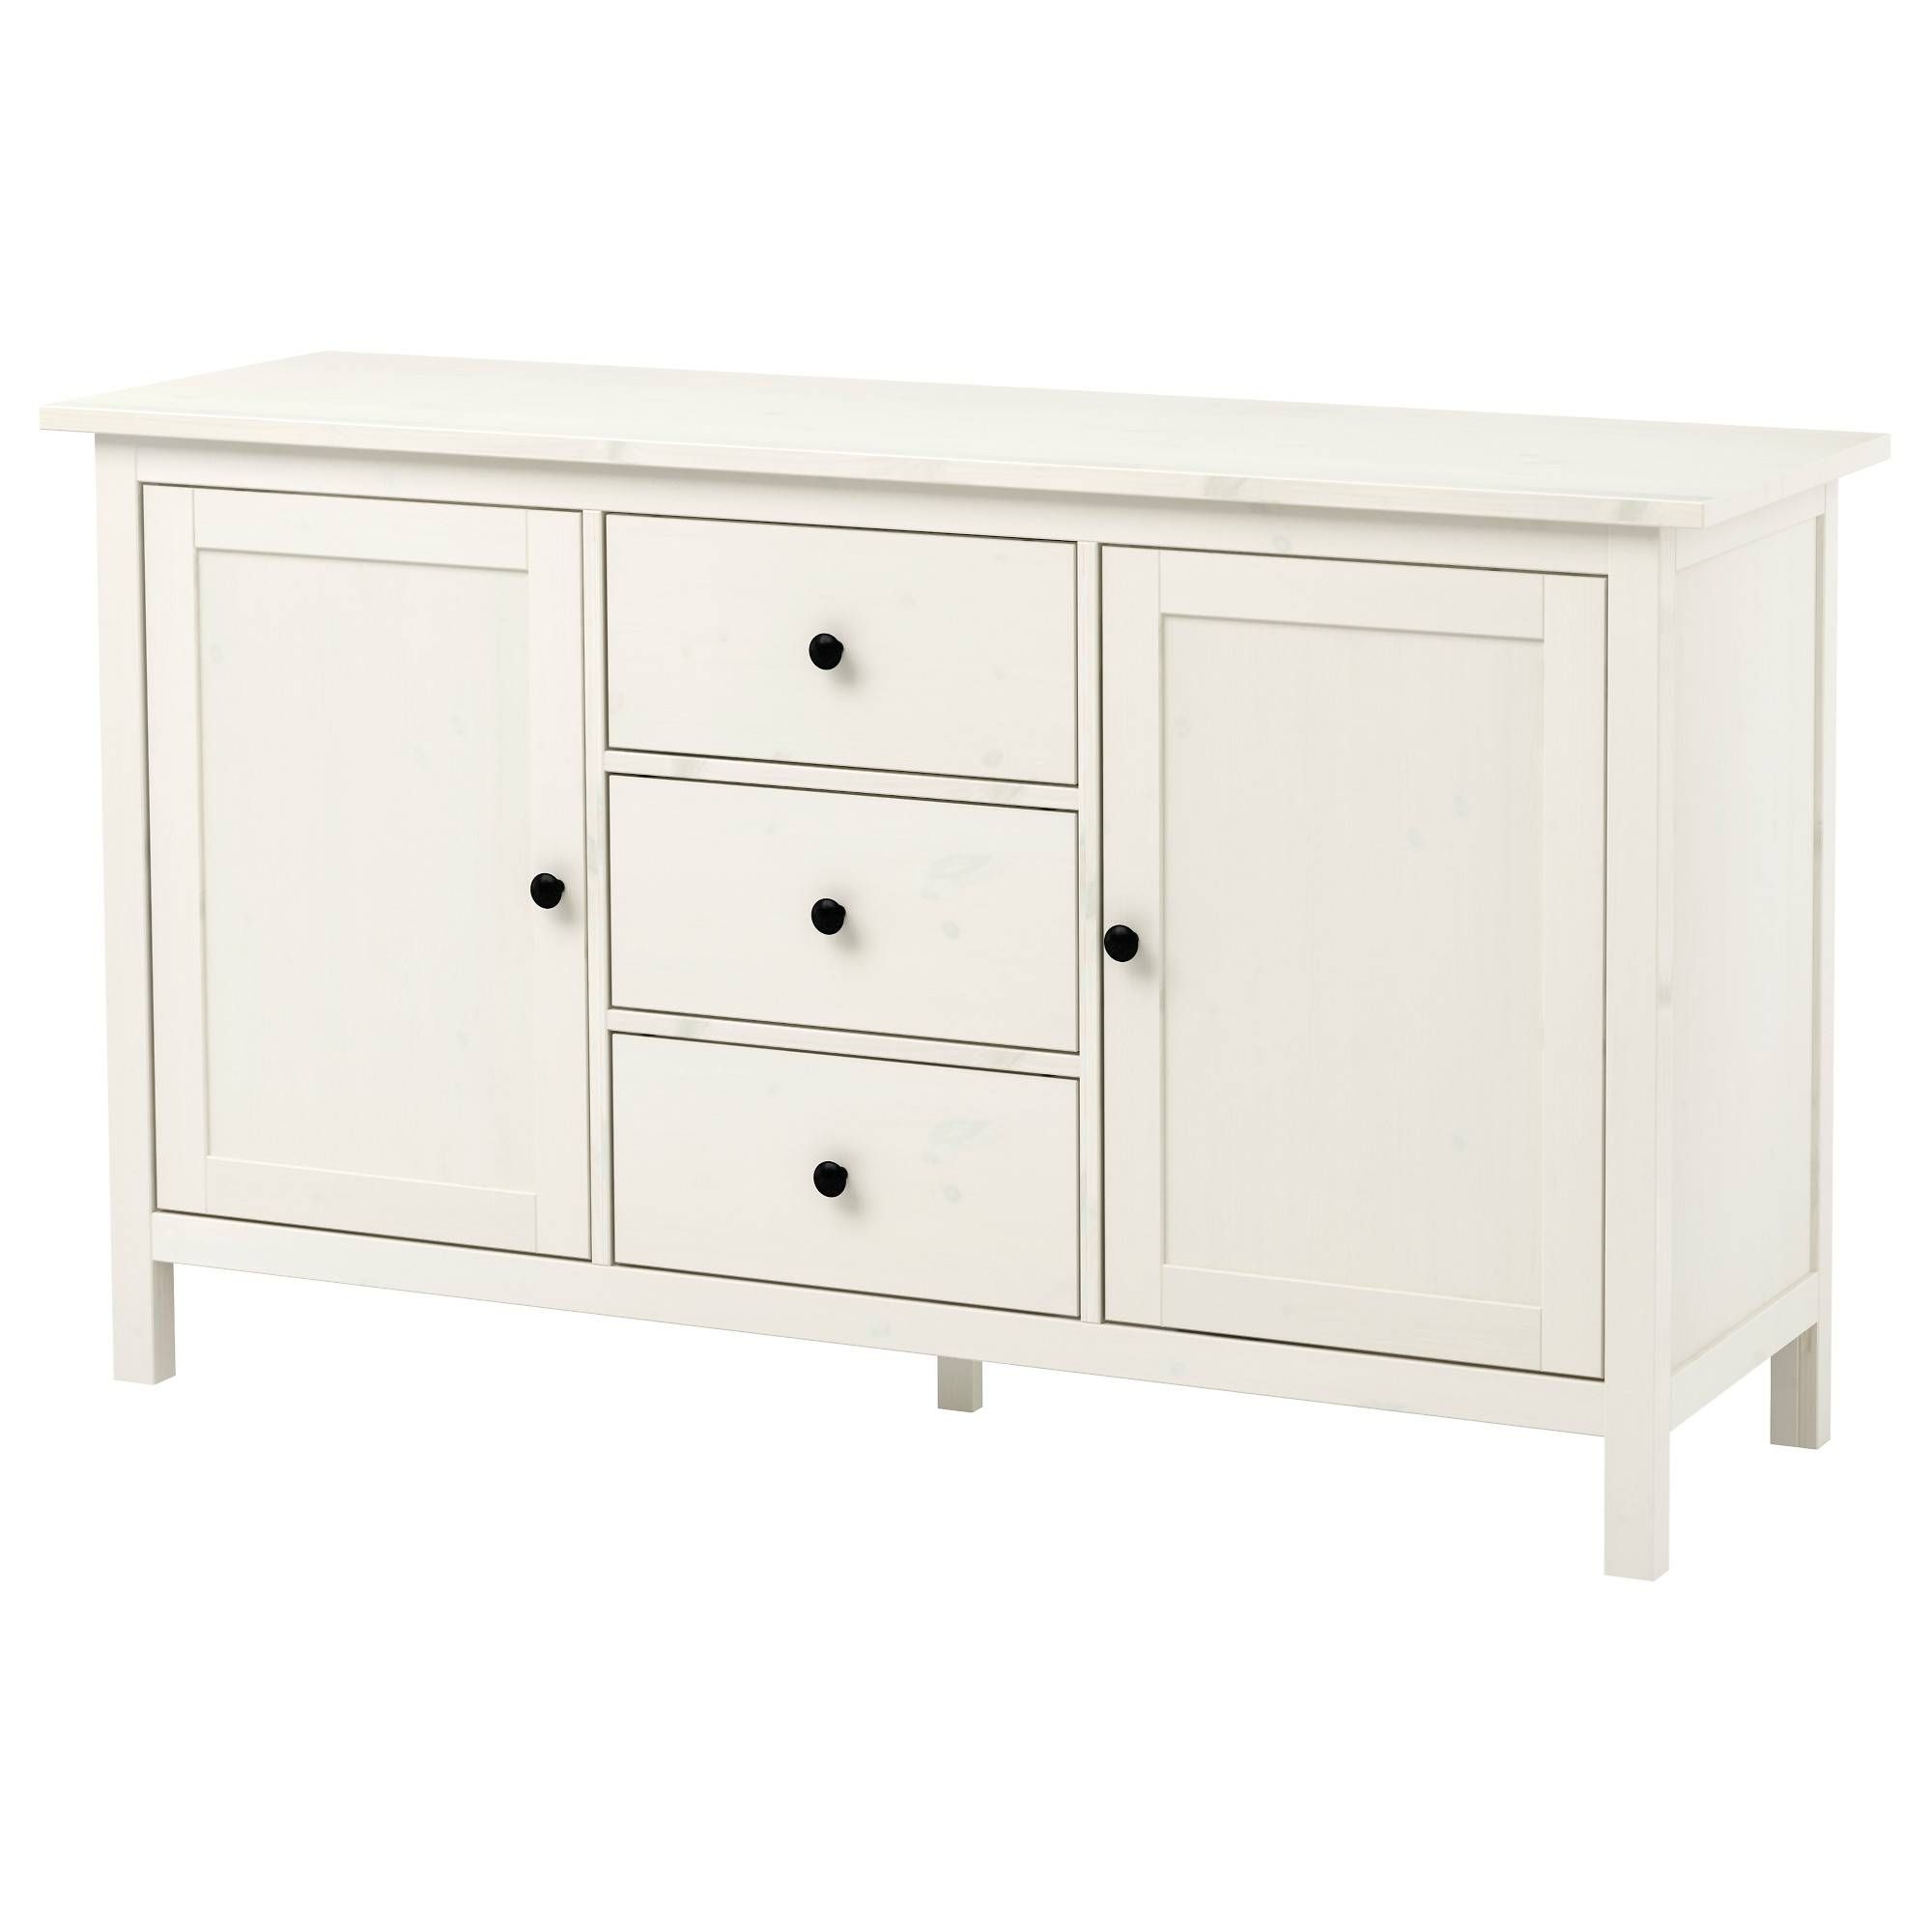 Hemnes Sideboard White Stain 157x88 Cm – Ikea Pertaining To Kitchen Sideboards White (View 5 of 20)